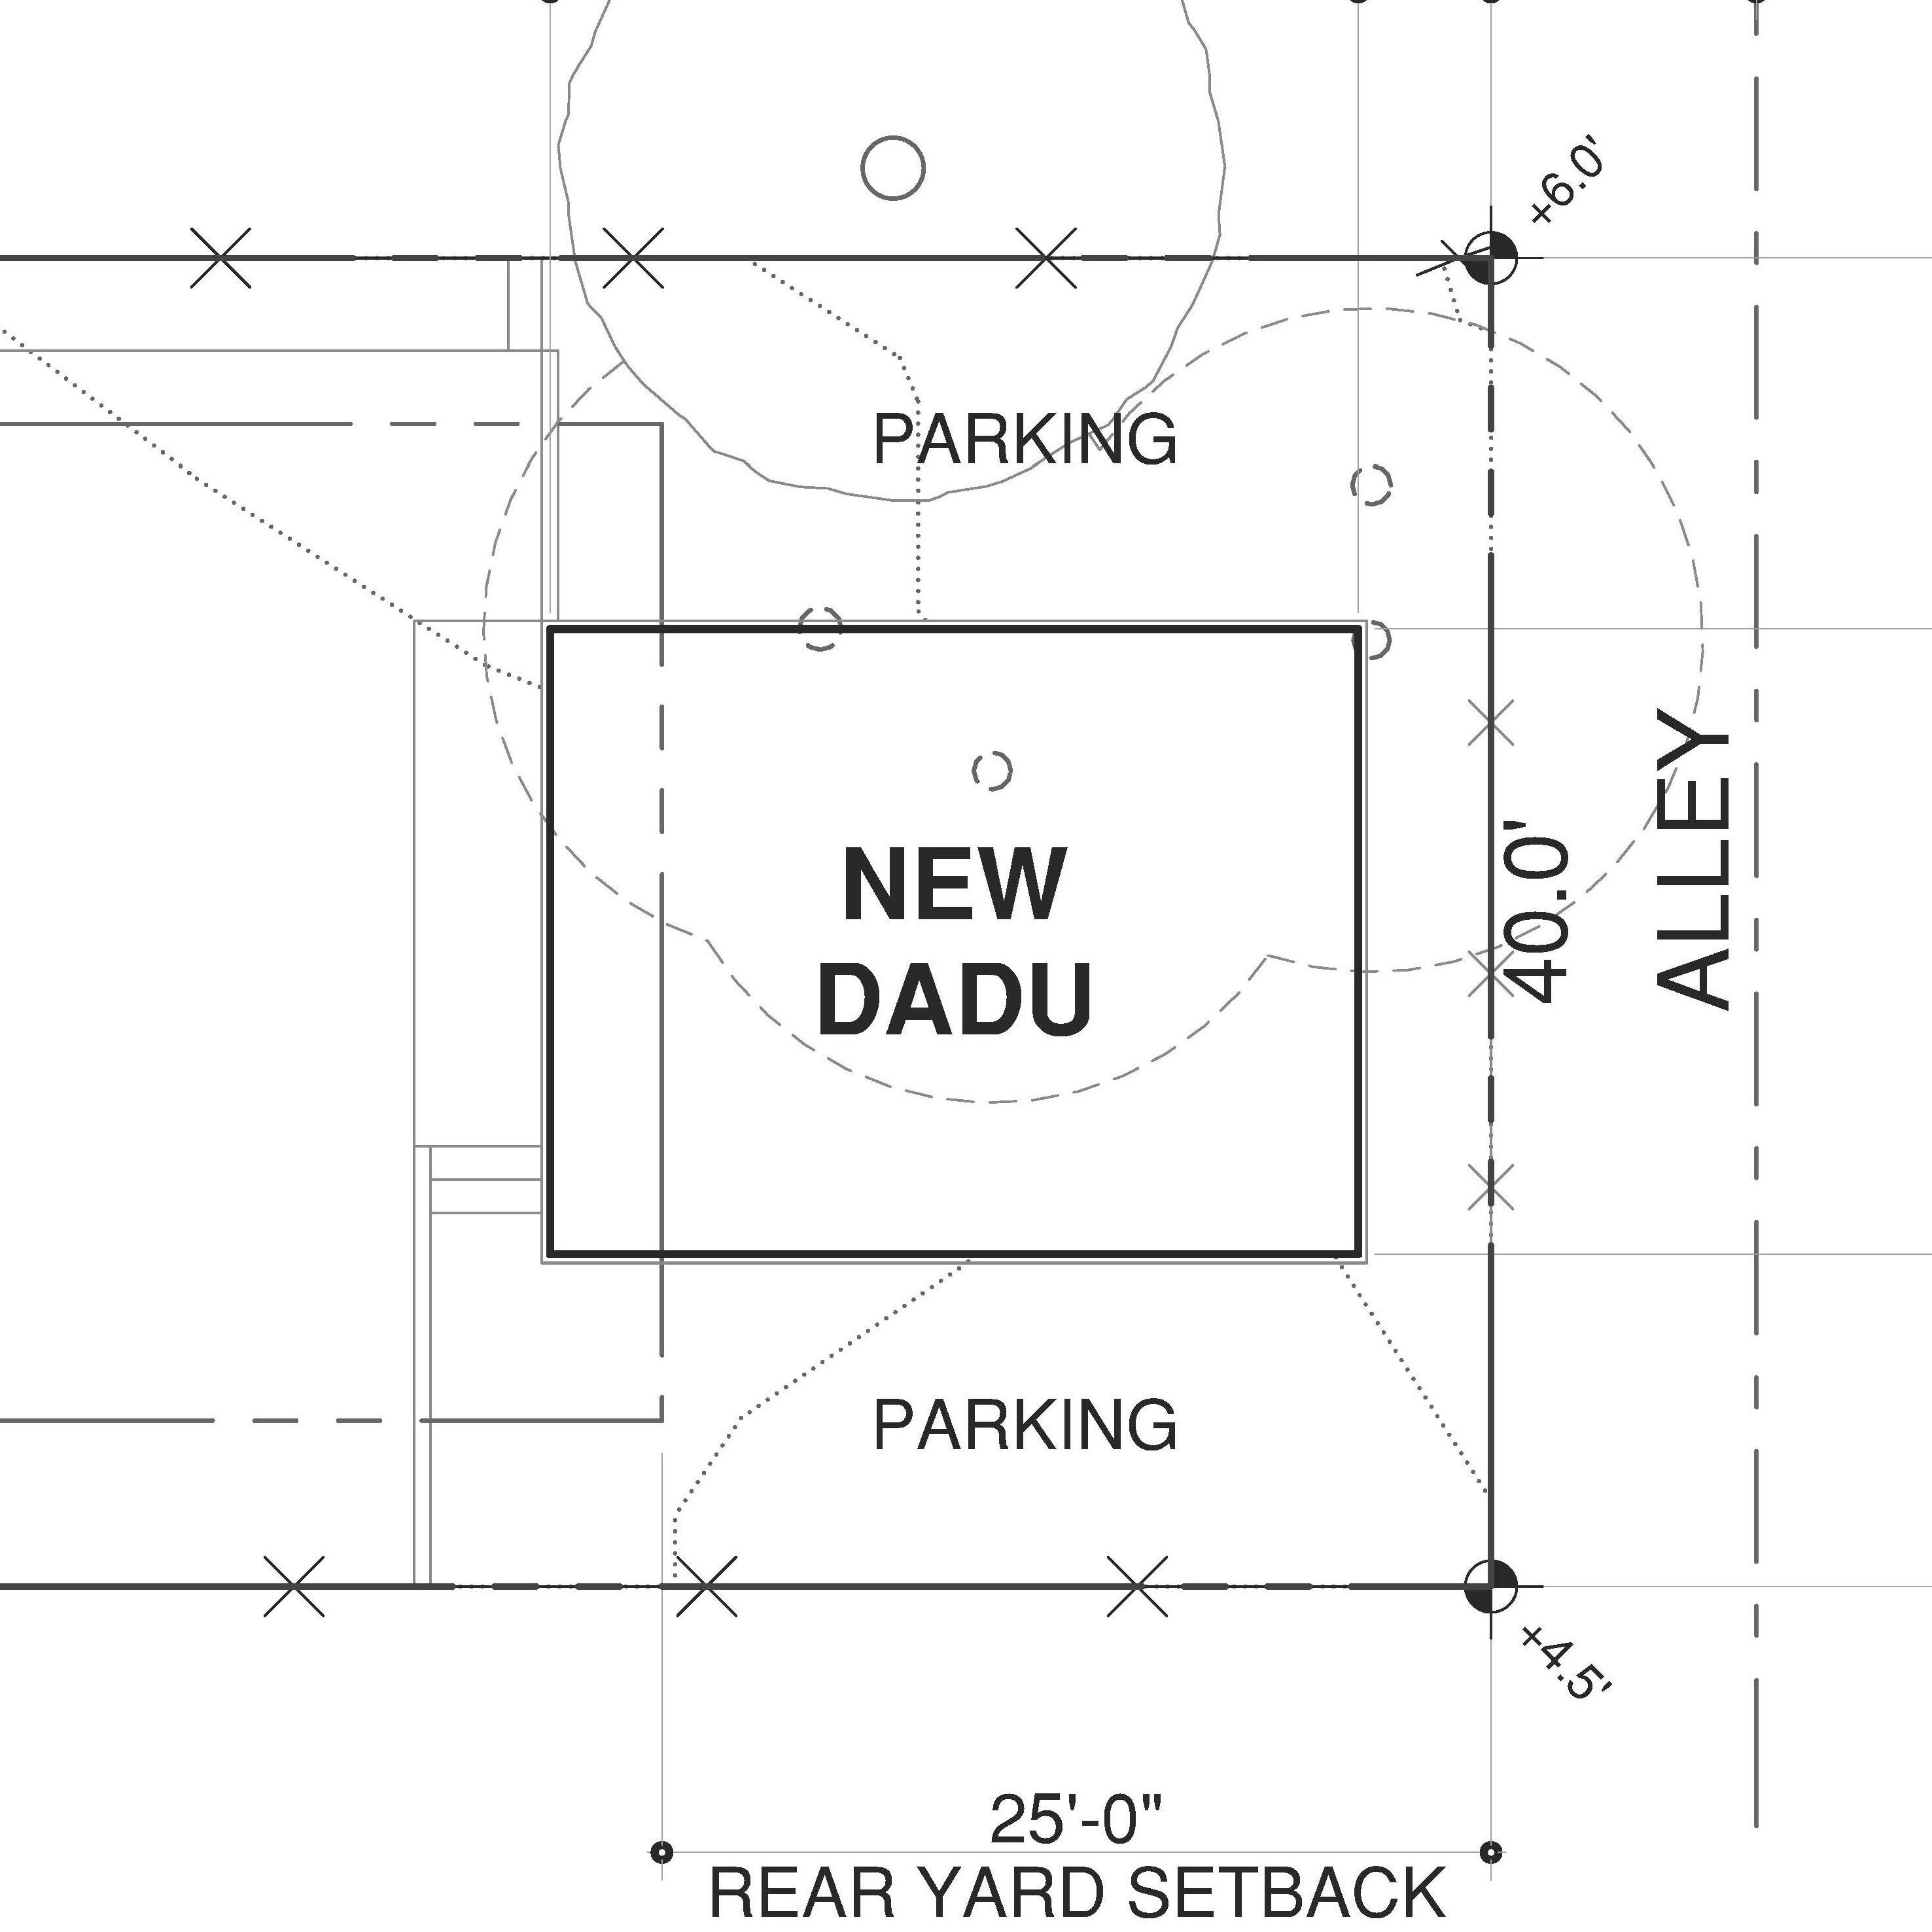 Designing A Dadu In Seattle Can I Build One On My Lot Cta